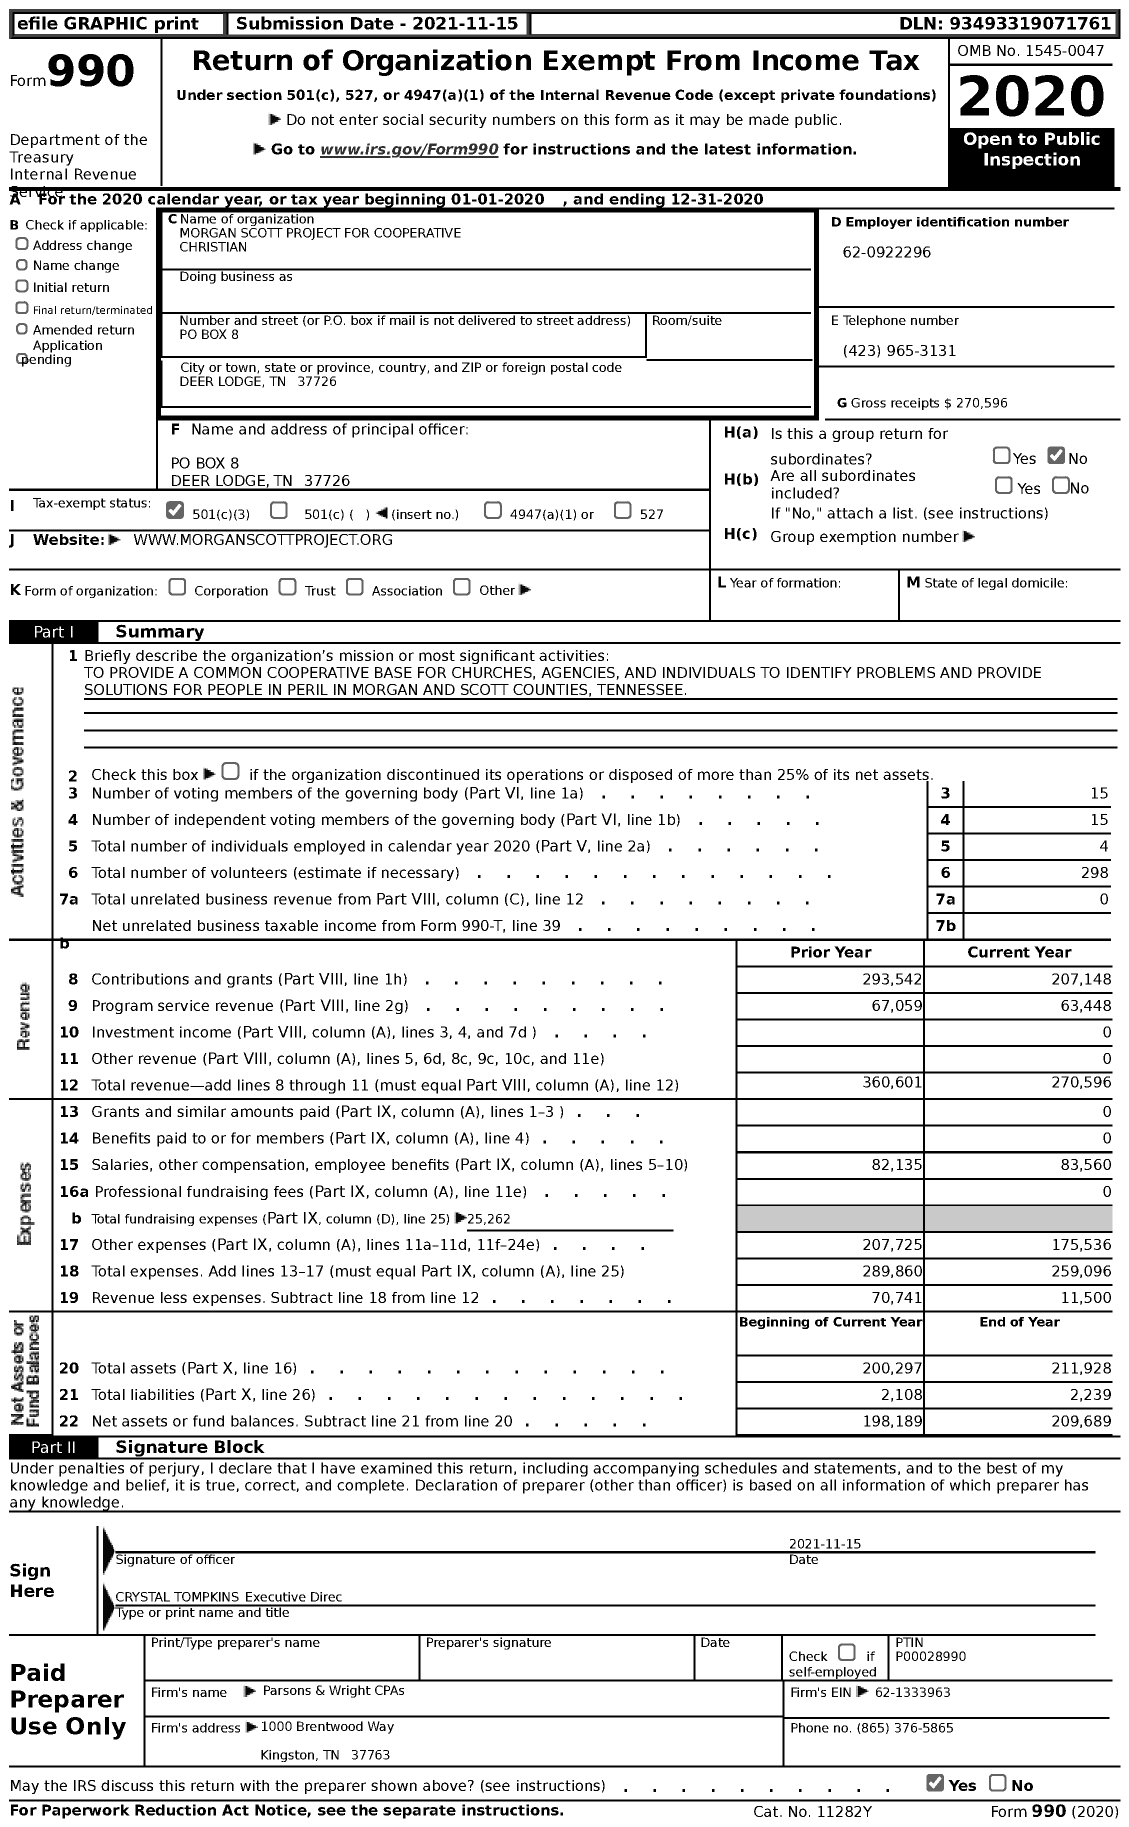 Image of first page of 2020 Form 990 for Morgan Scott Project for Cooperative Christian